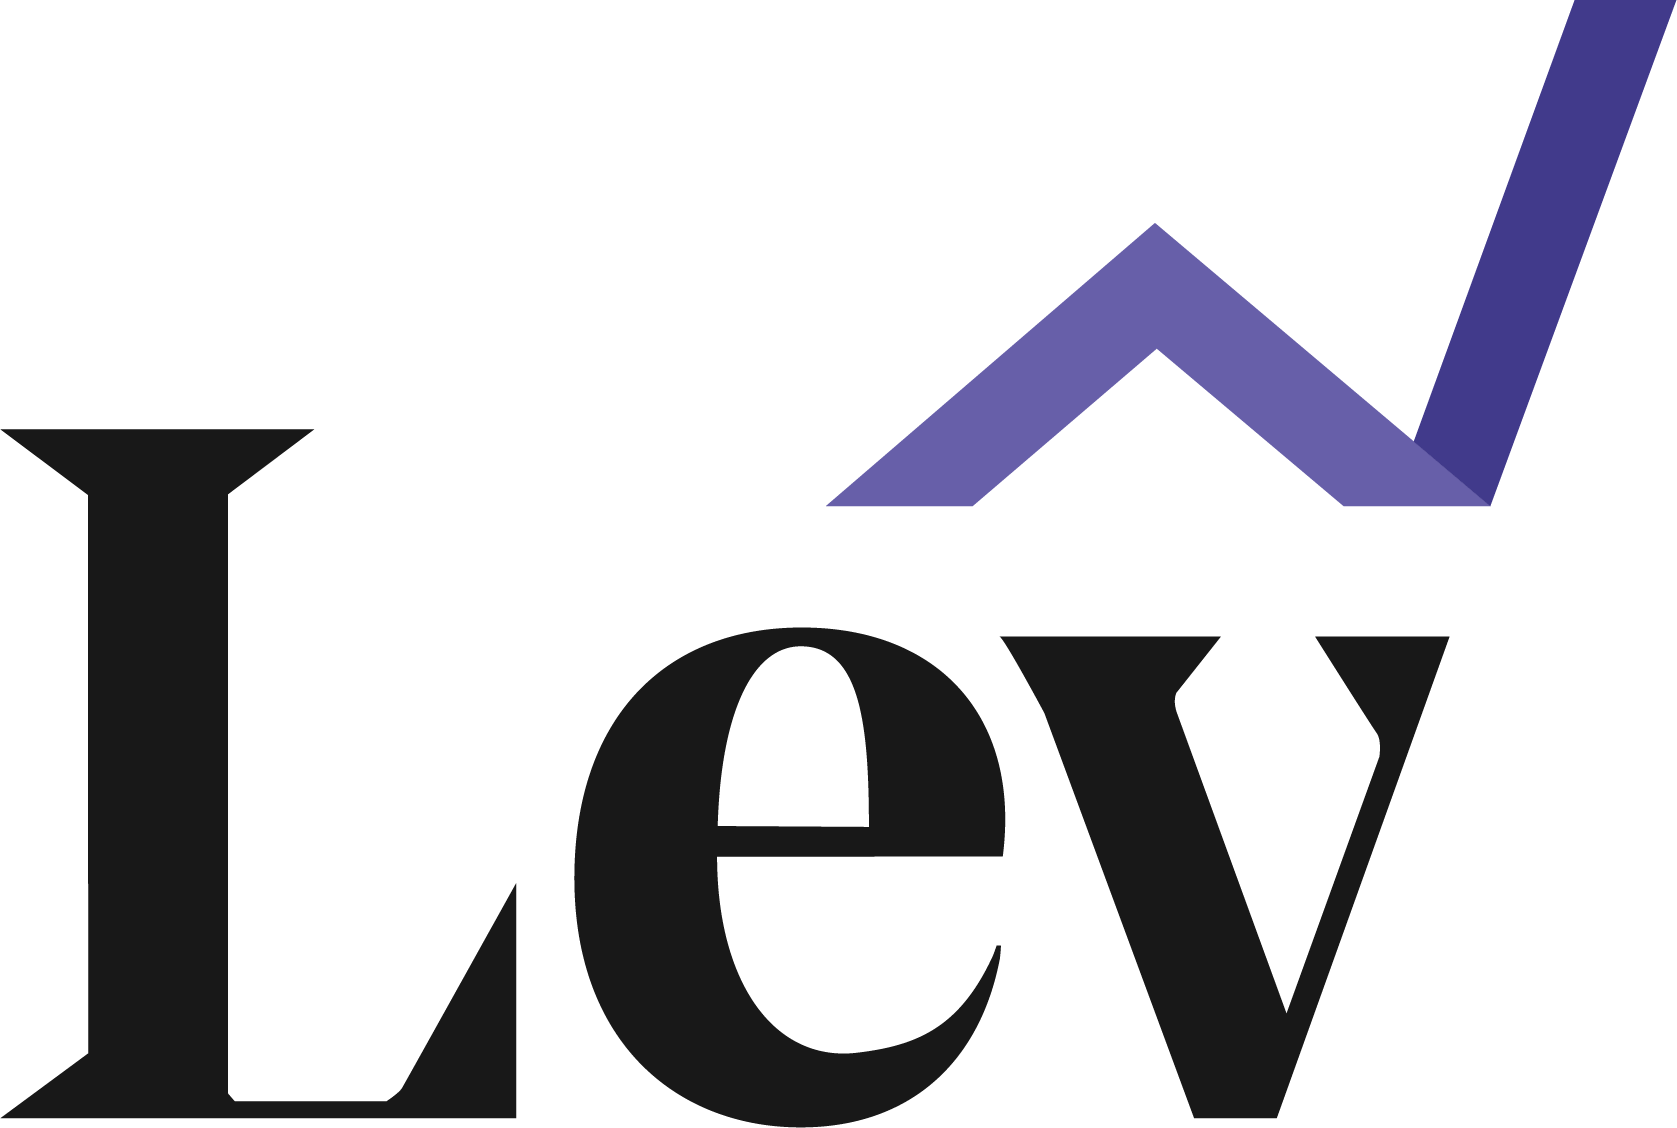 Lev raises $170m, including Series B led by new US brand First VC